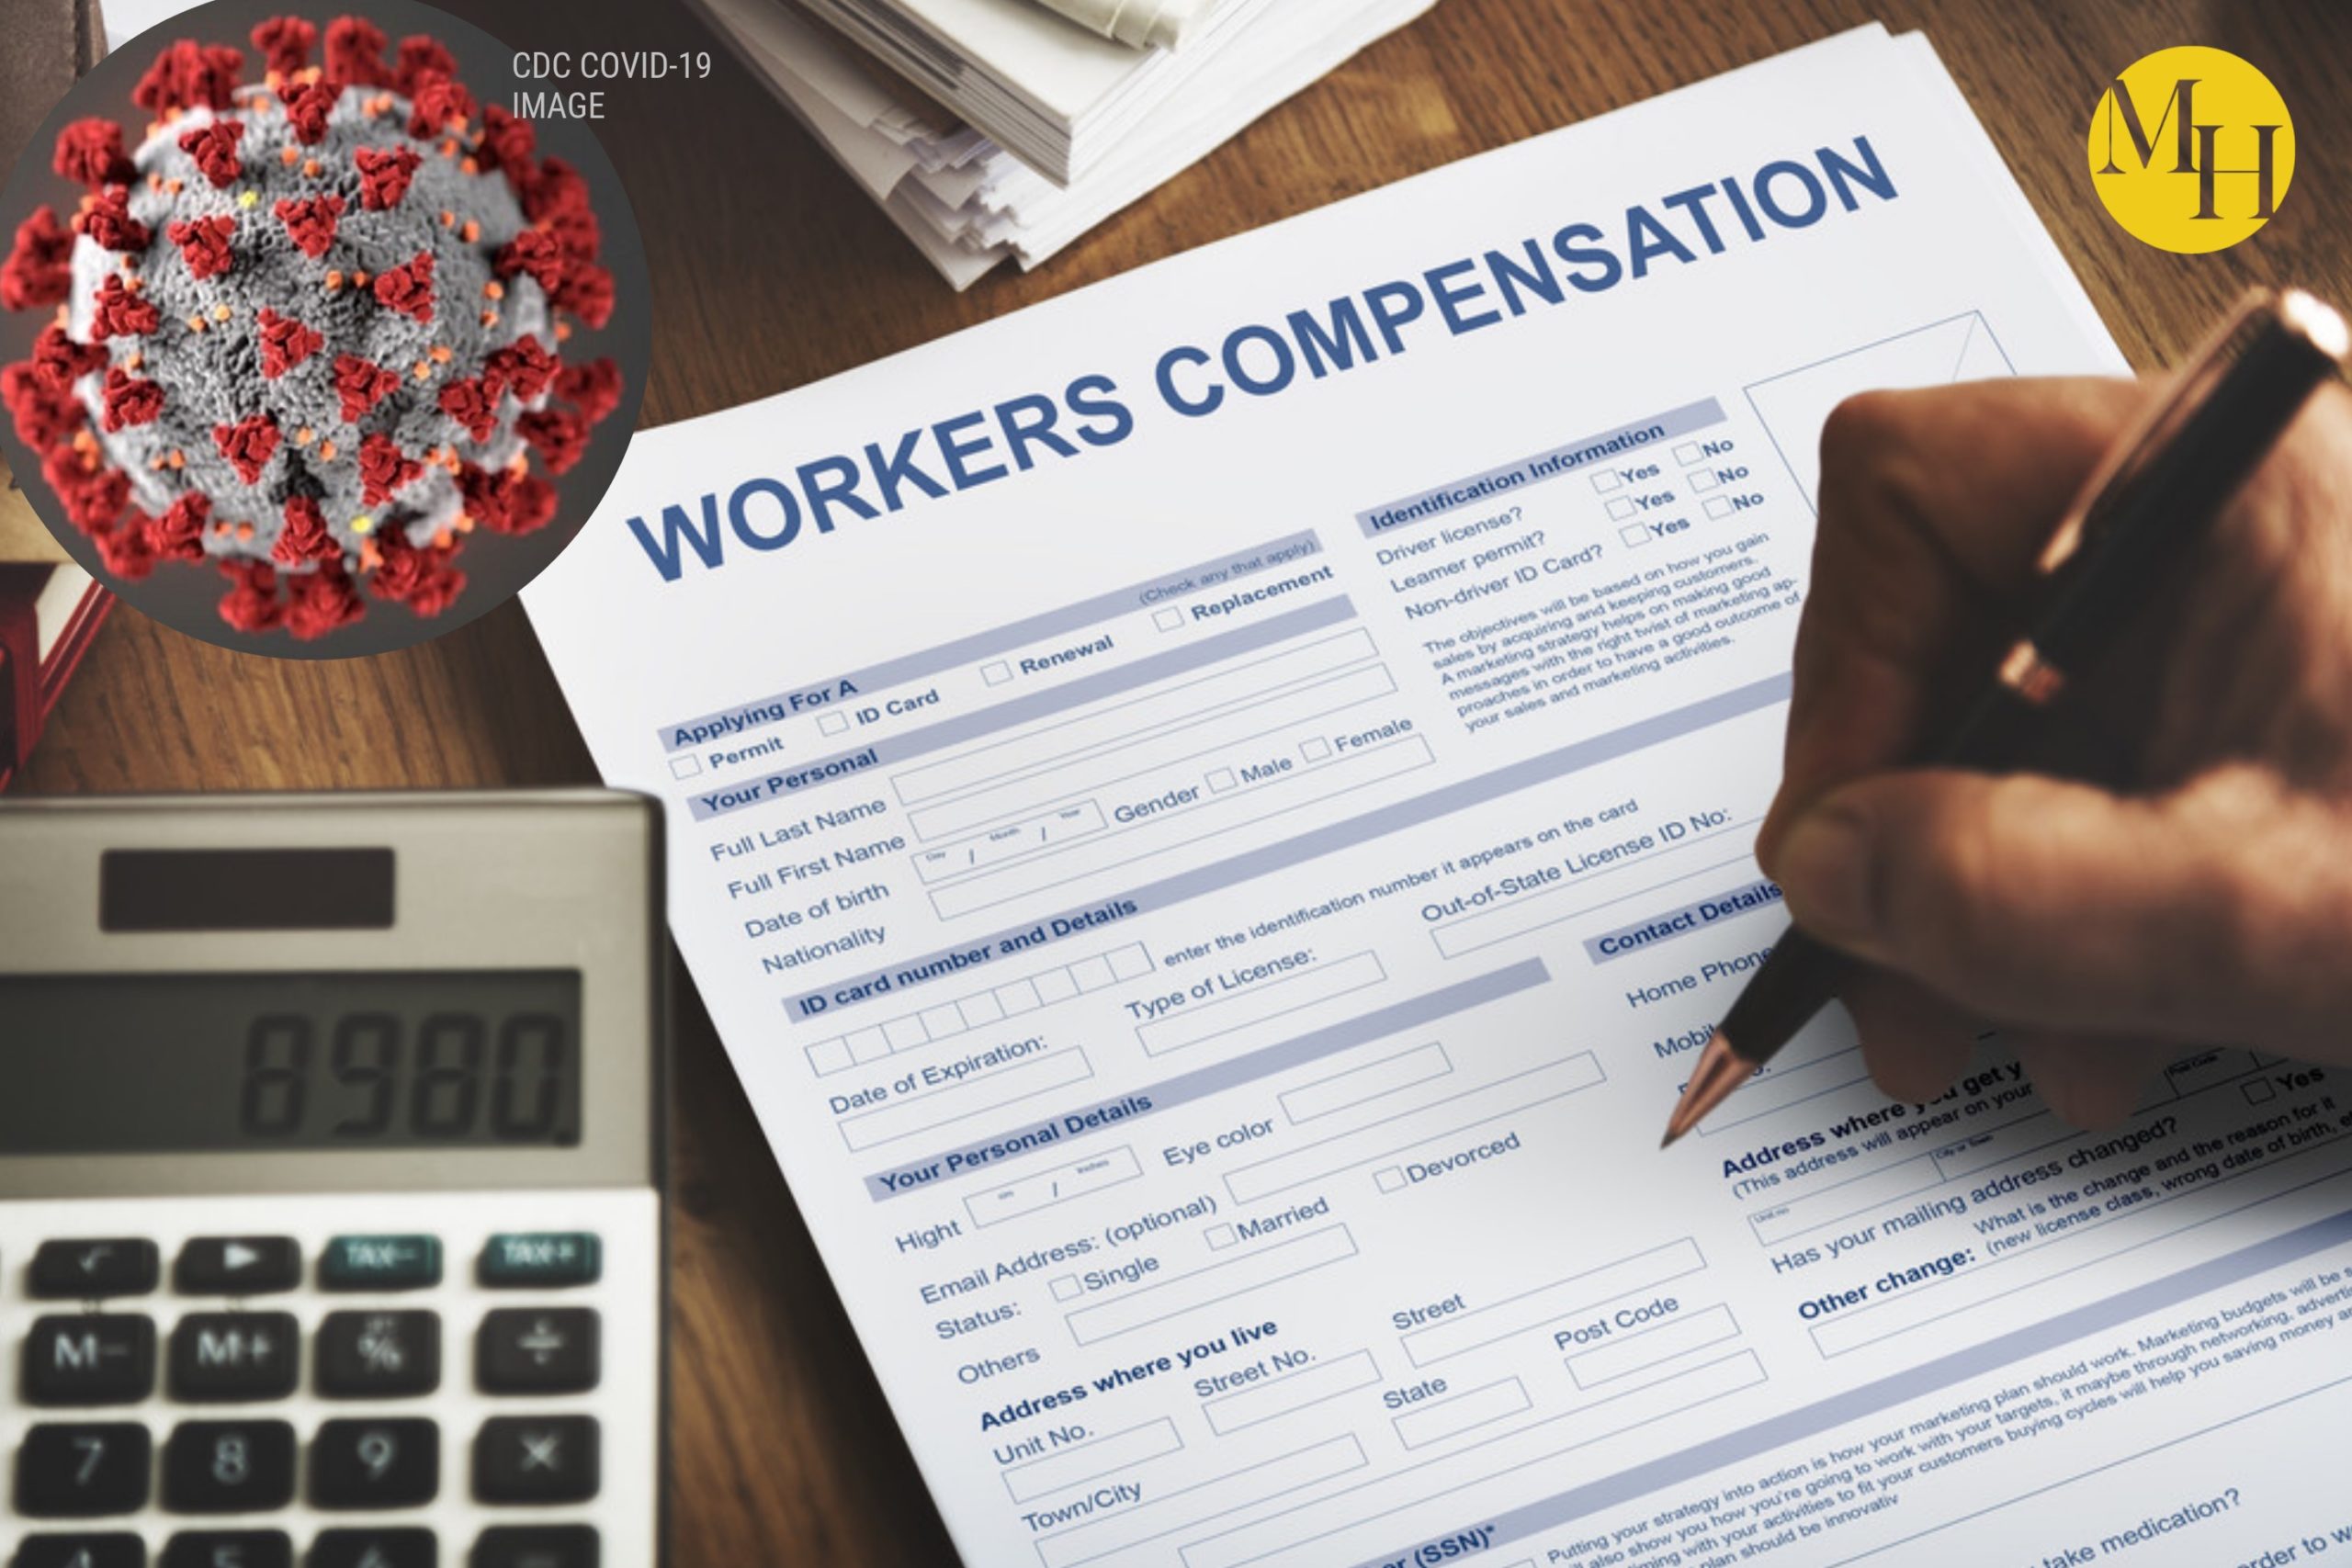 What Injuries Qualify for Workers’ Compensation?